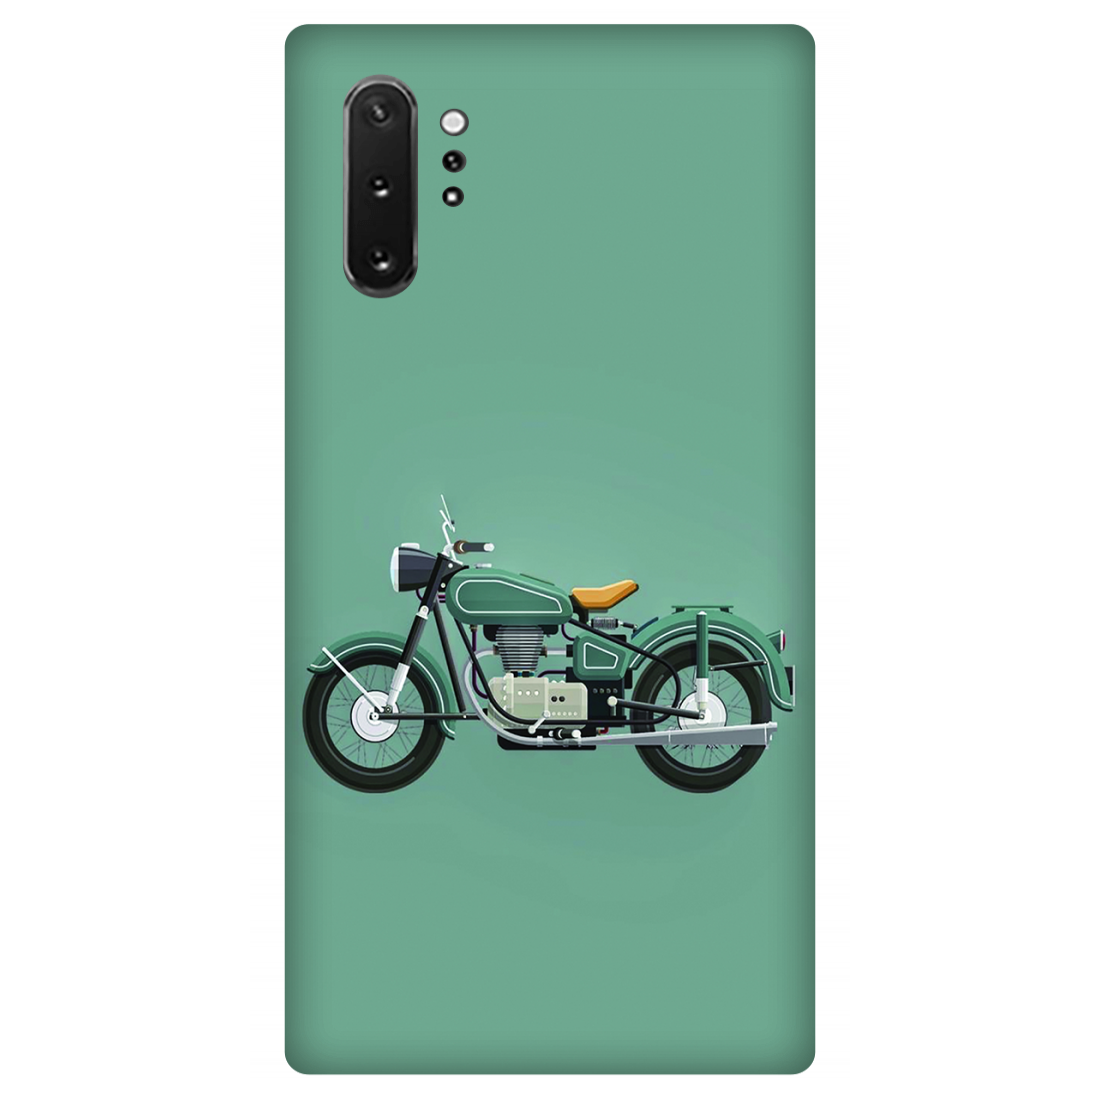 Showcasing a Motorcycle Case Samsung Galaxy Note 10 Plus